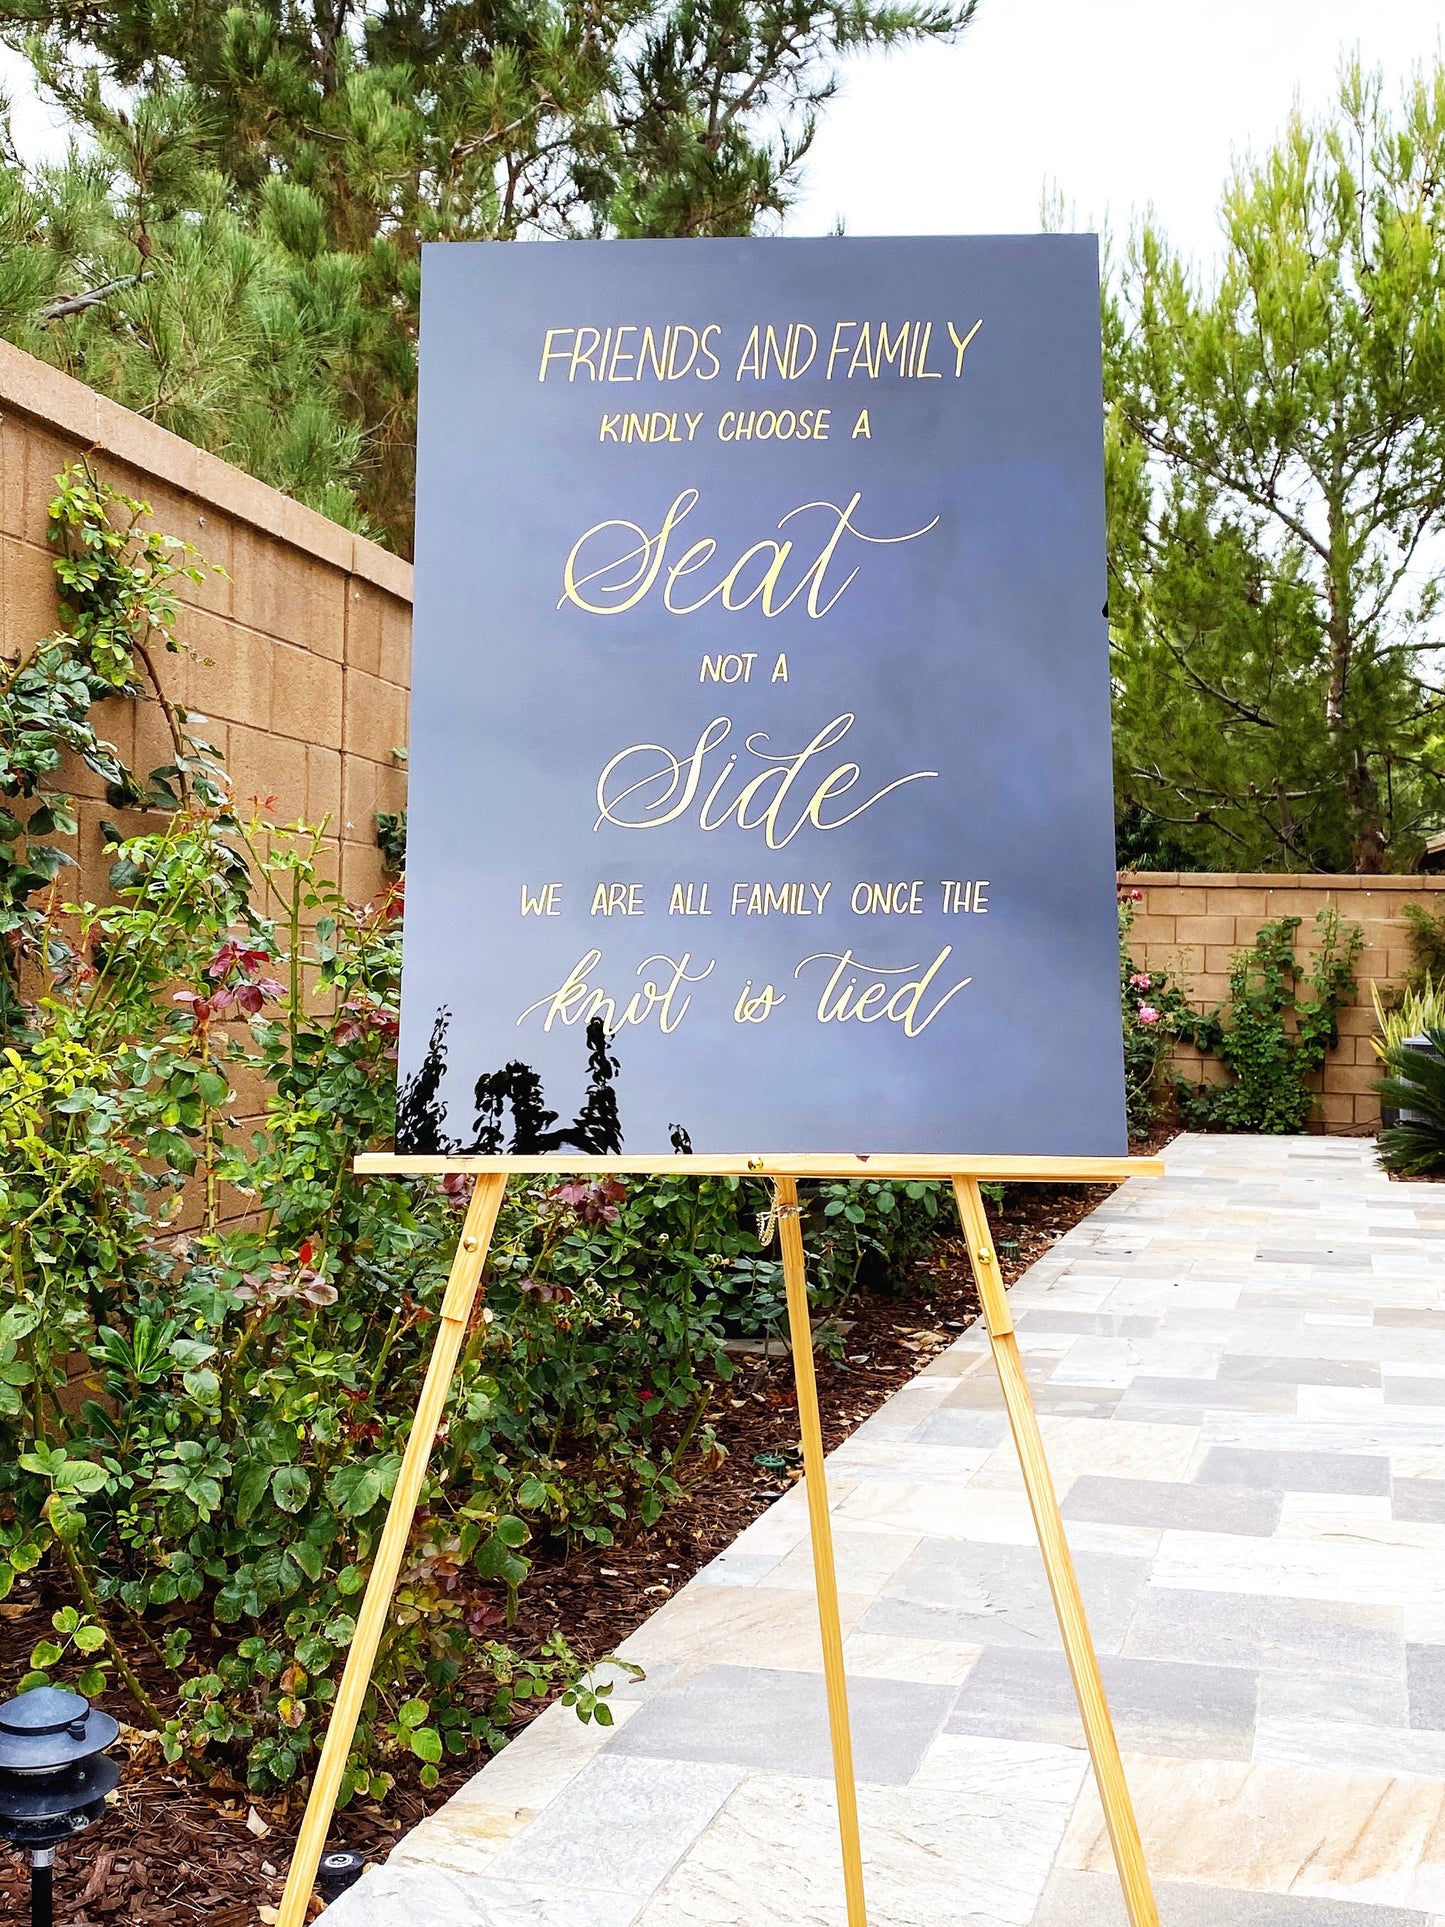 Pick A Seat Not A Side Wedding Sign, Custom Wedding Sign